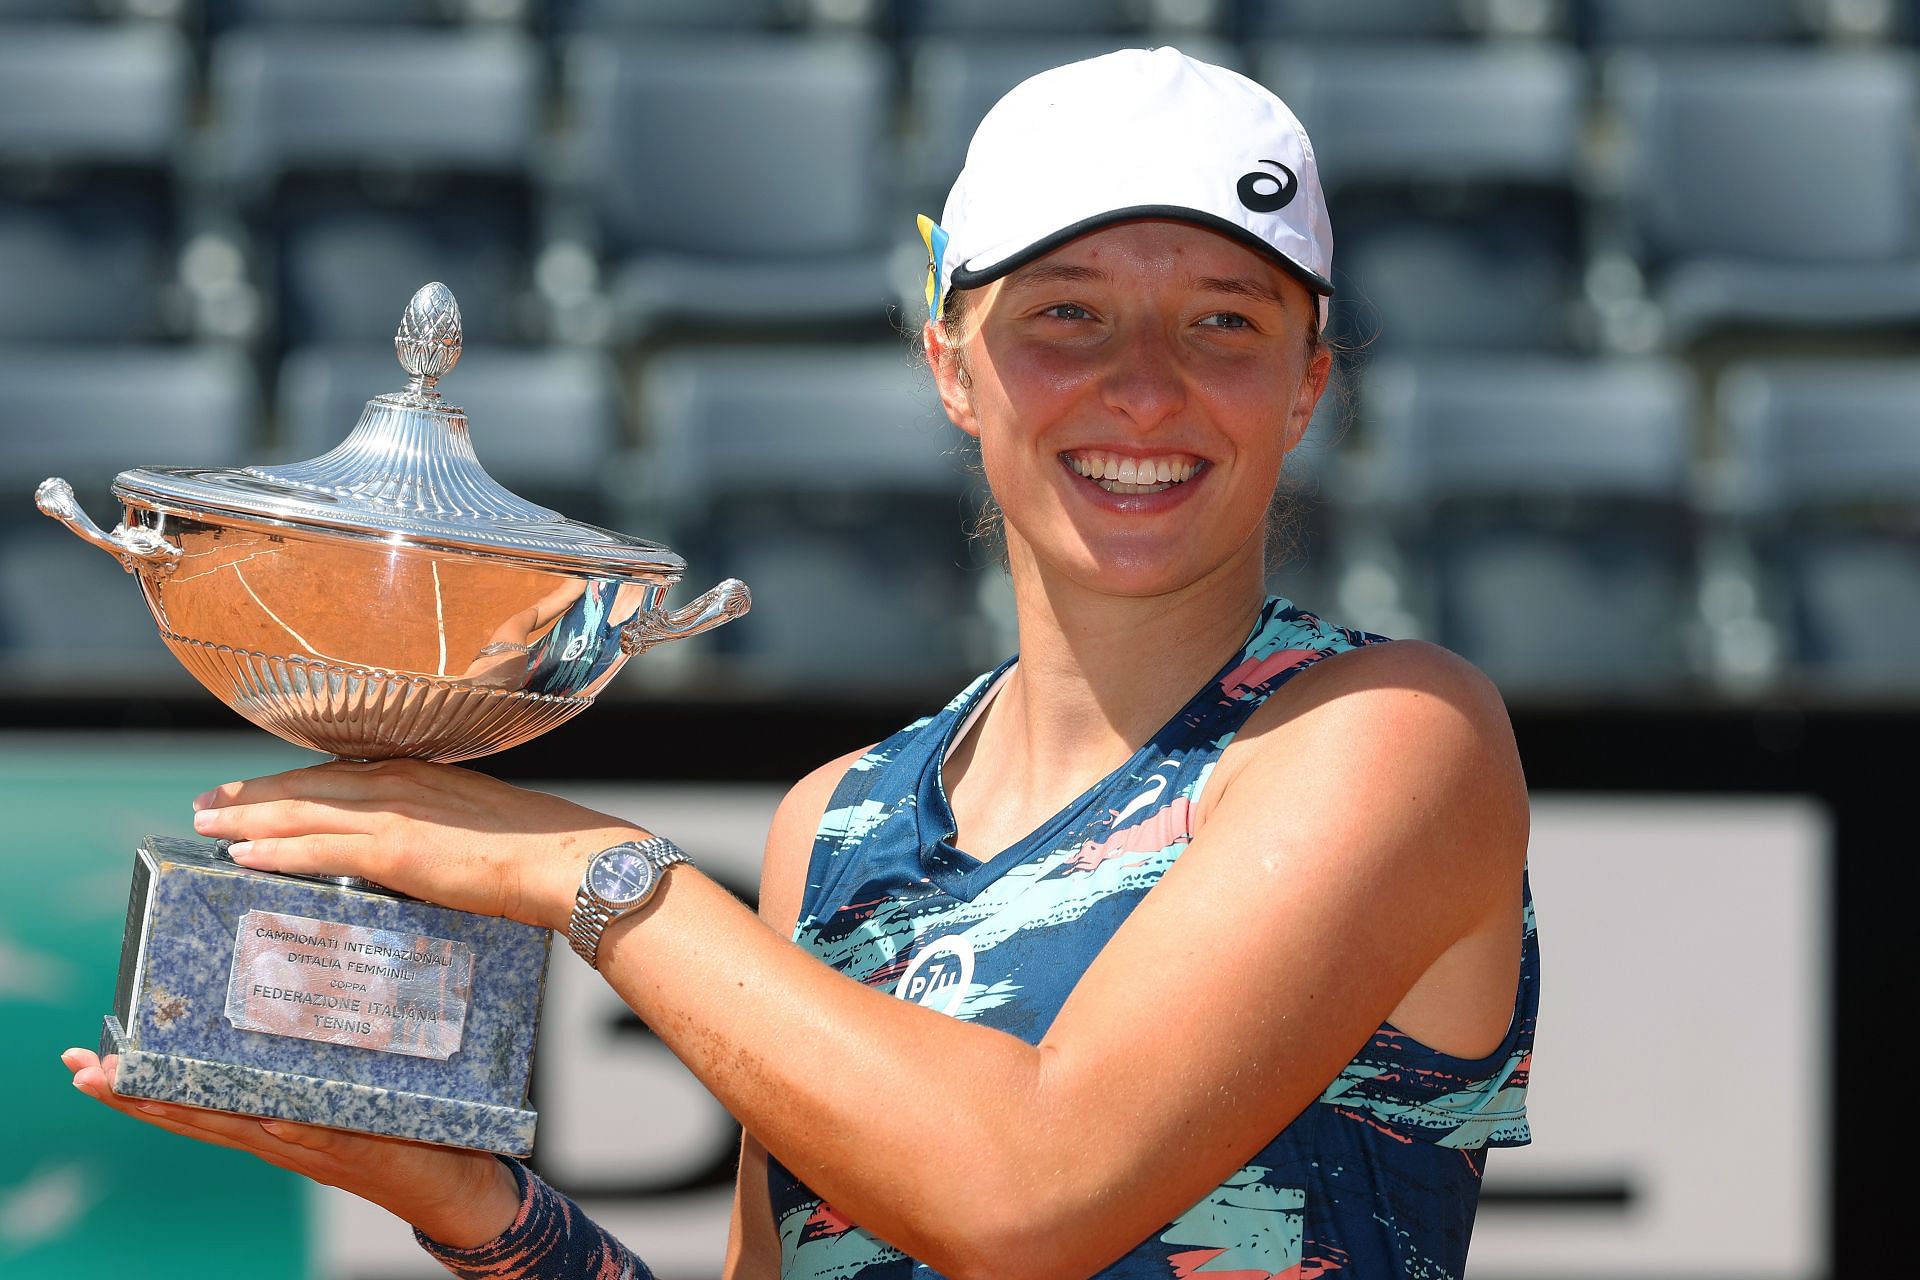 Iga Swiatek is the overwhelming favorite for the Roland Garros title this year